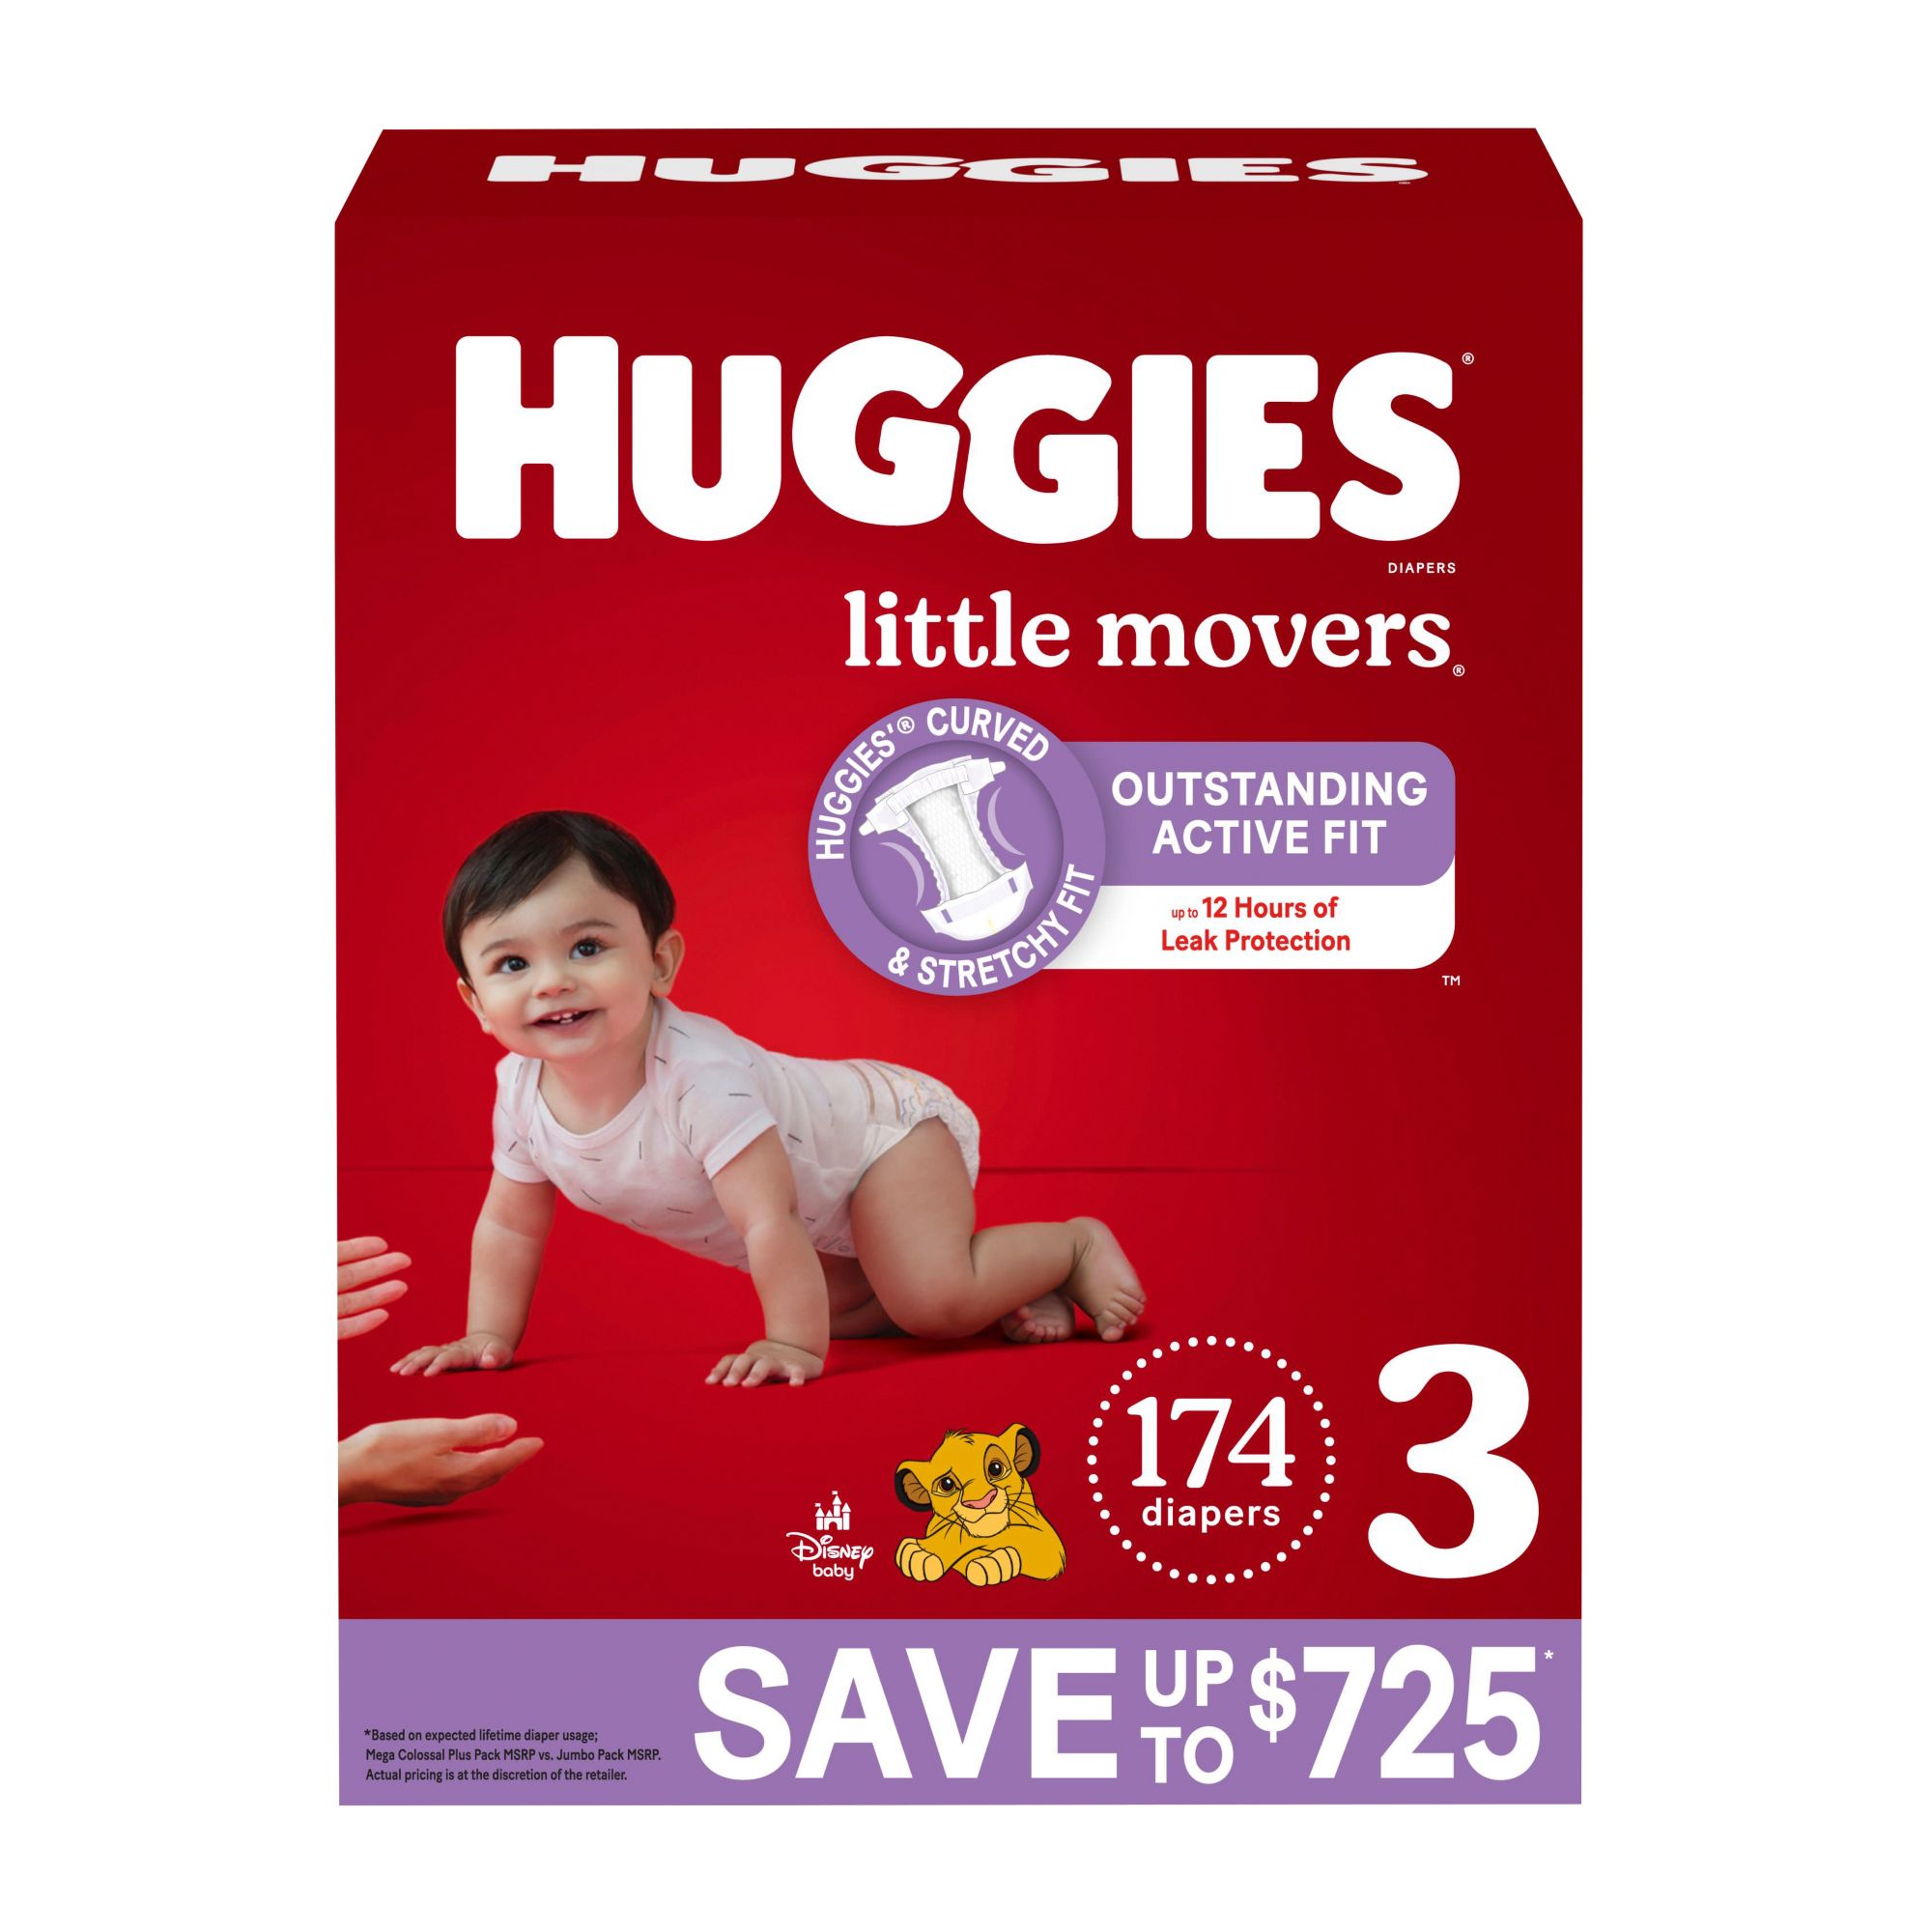 Huggies Little Movers Baby Diapers | BJ's Wholesale Club